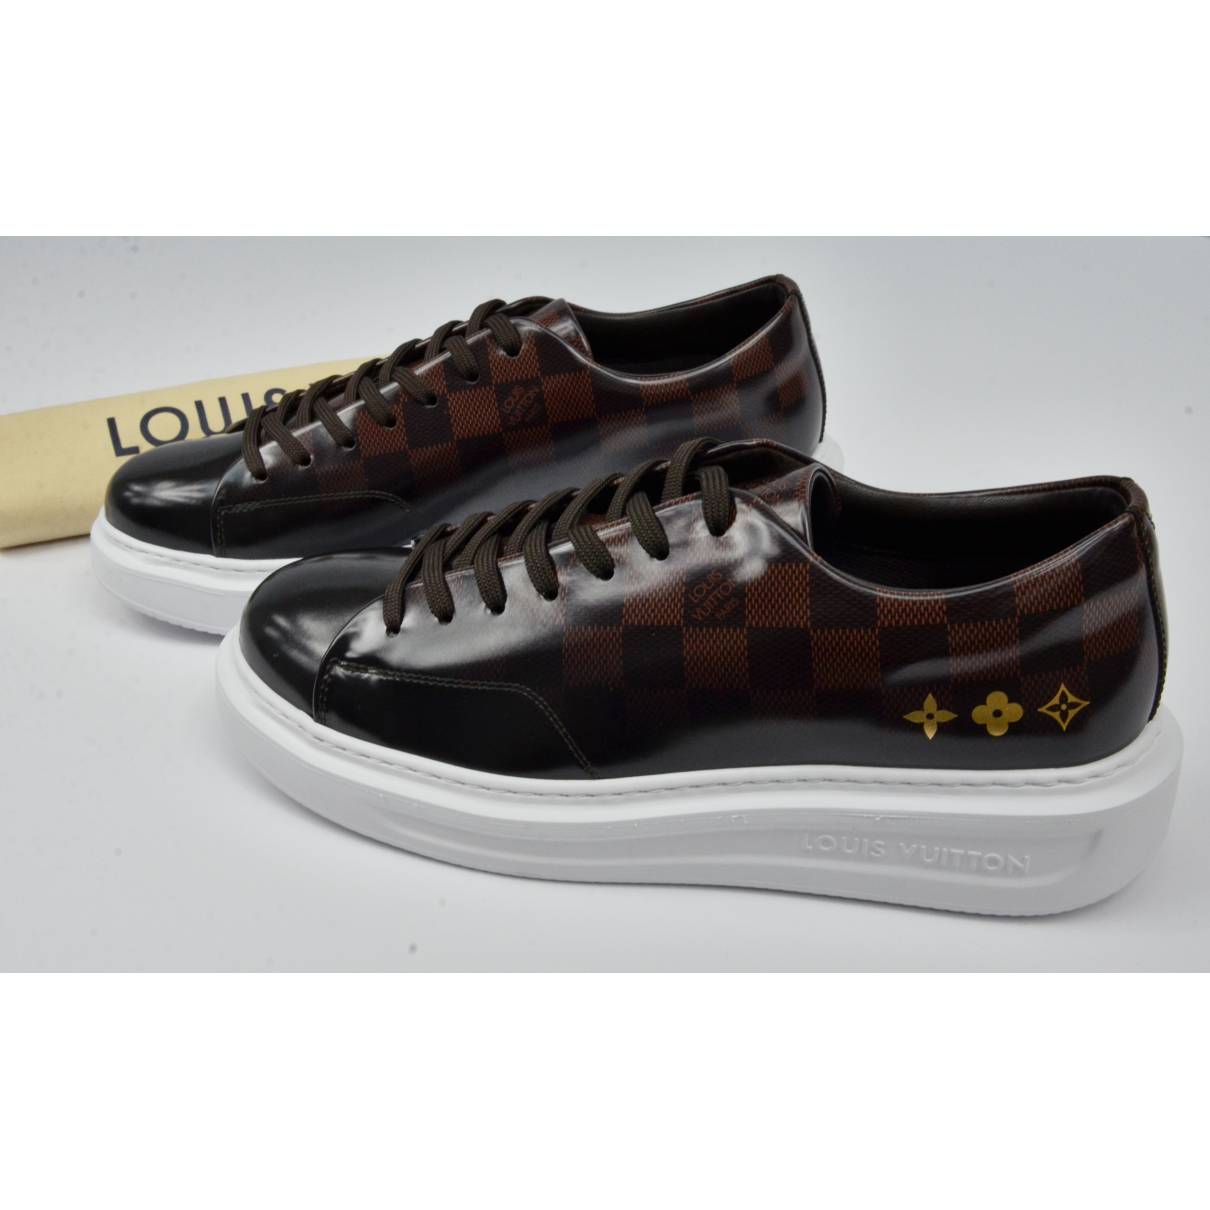 Louis Vuitton White Monogram Leather Beverly Hills Sneakers Size 44